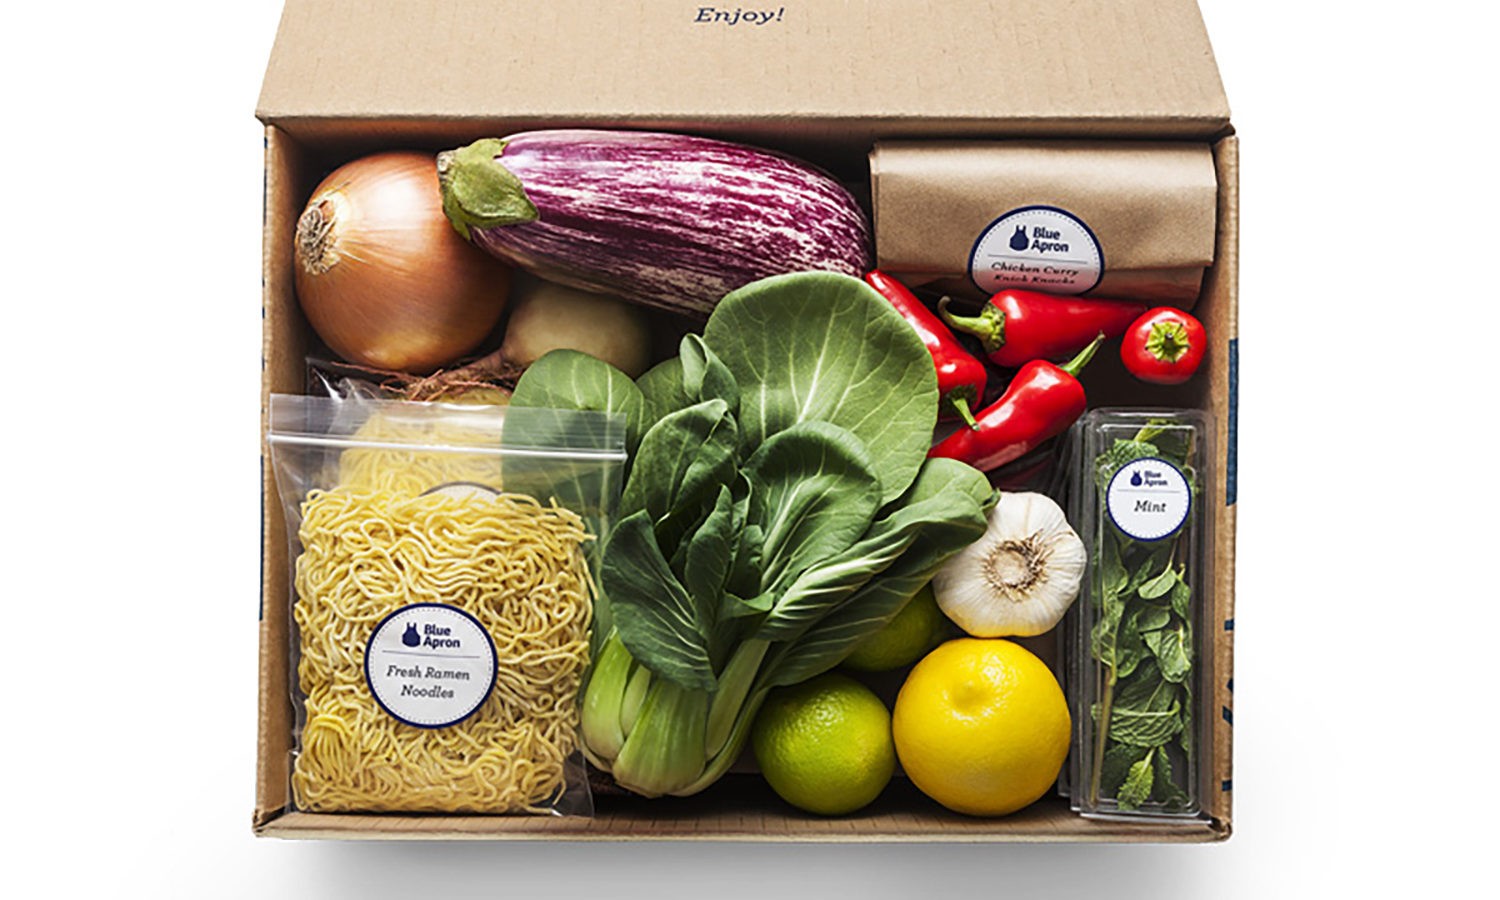 Blue Apron App - Discover the Best American Meal Kit Service with Easy Ingredients and Recipes